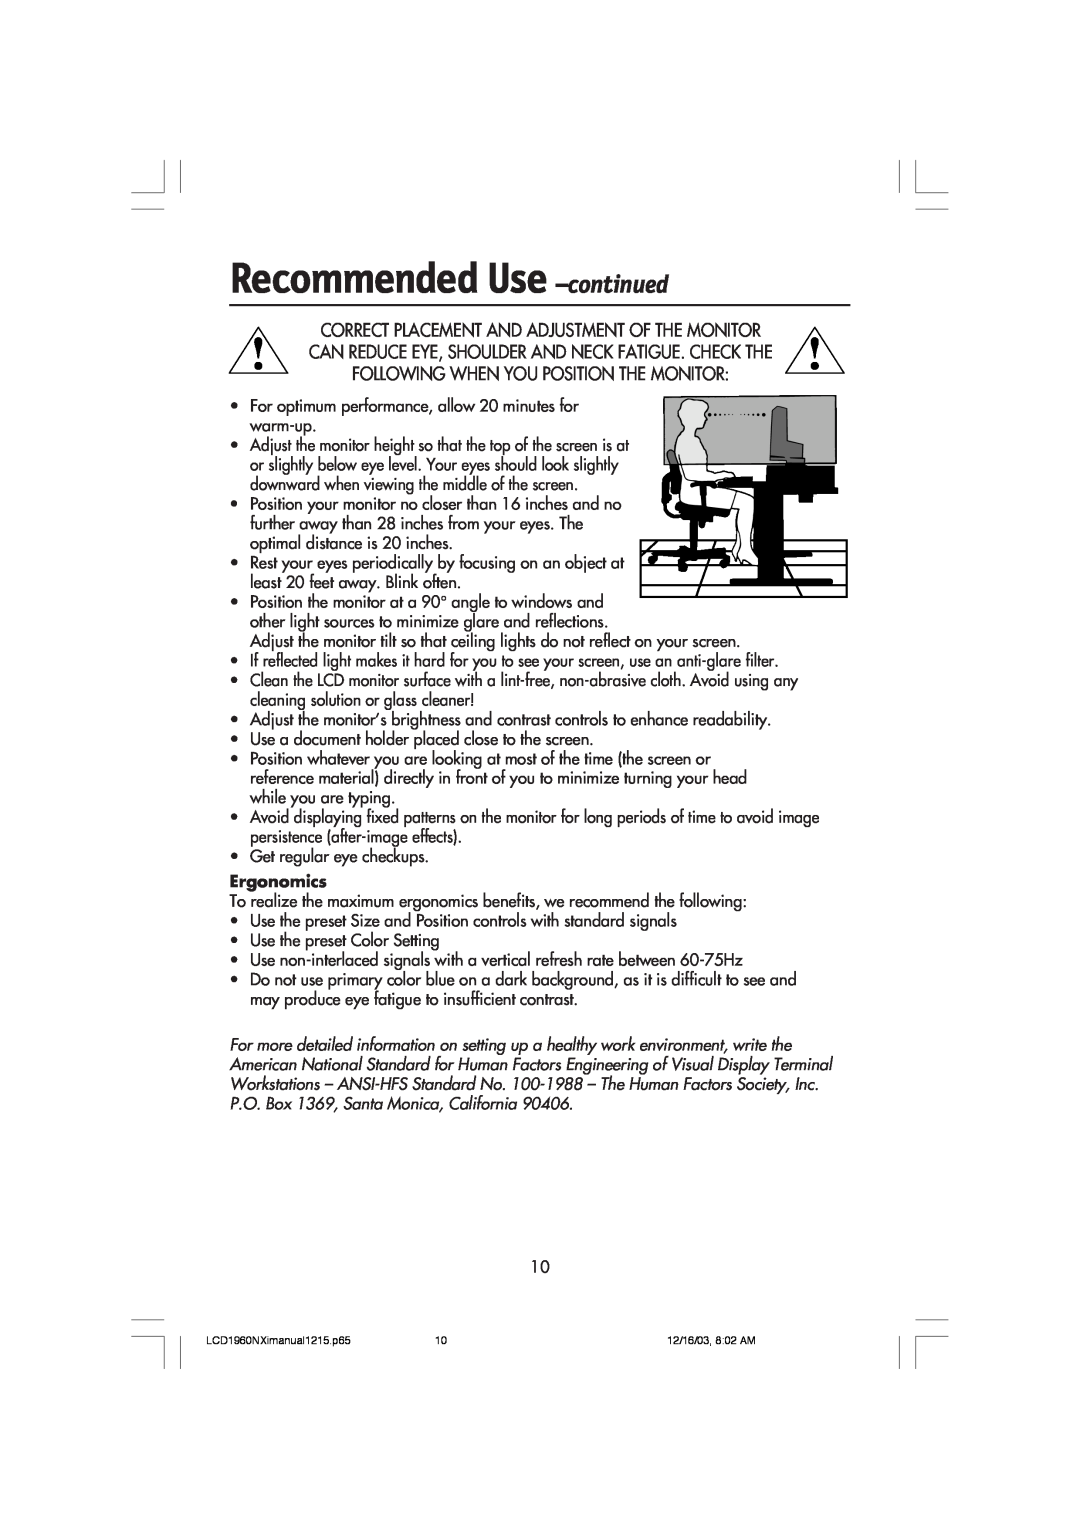 NEC LCD1960NXI manual Recommended Use -continued, Ergonomics 